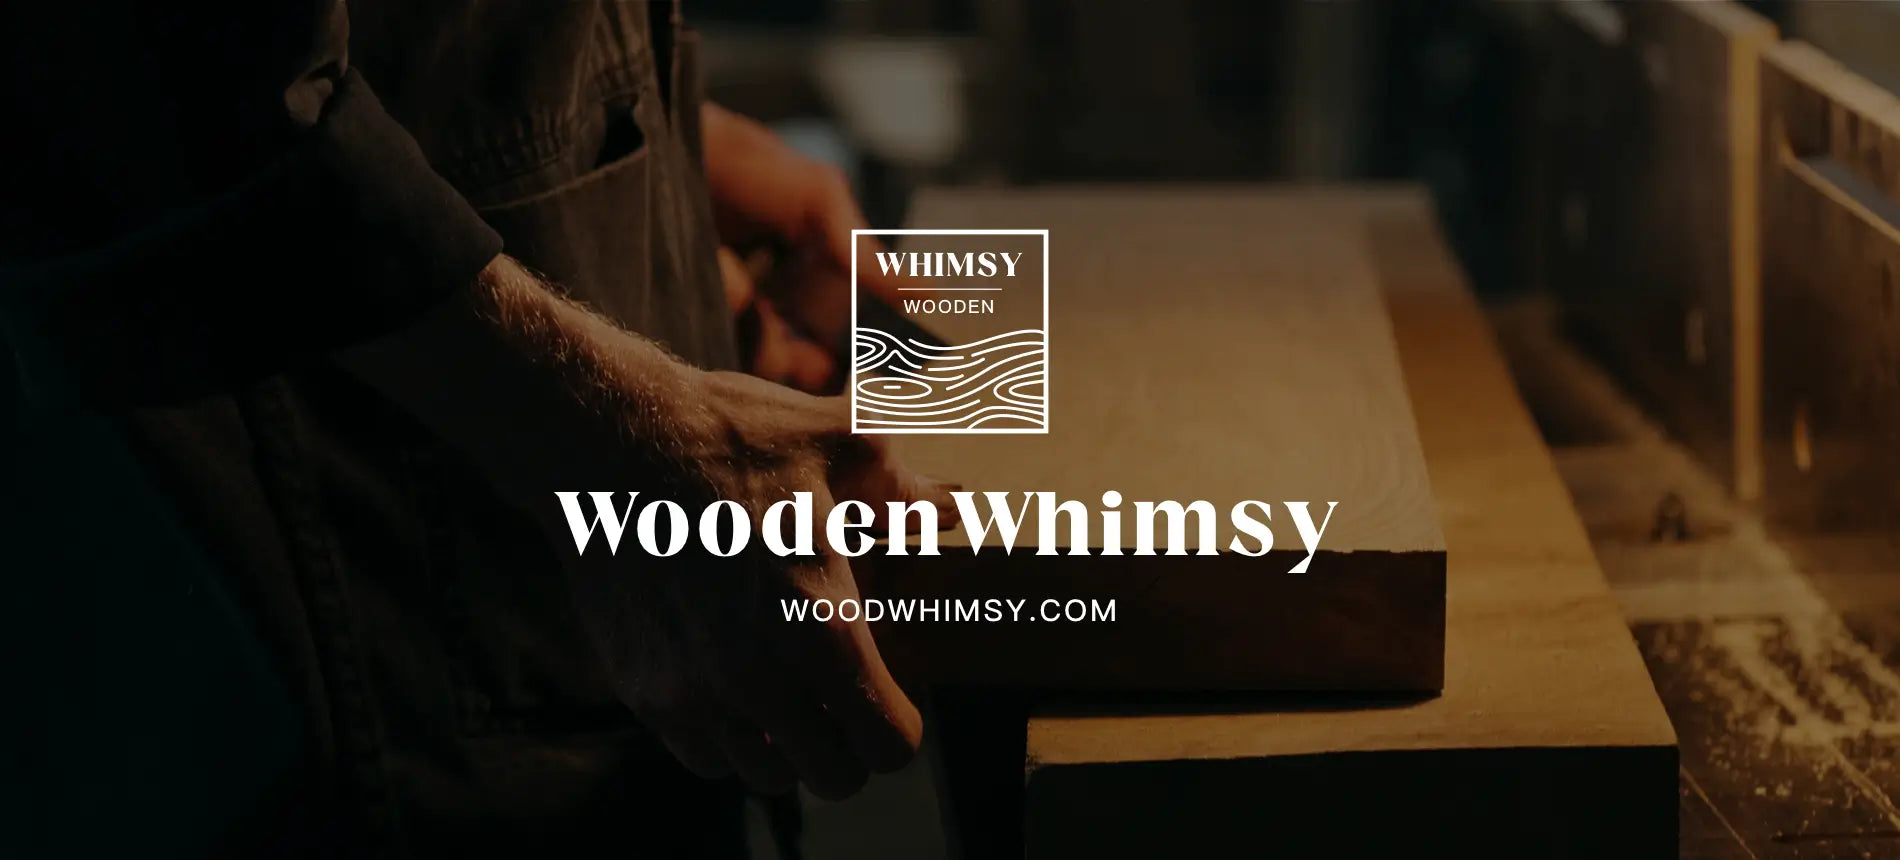 woodenwhimsy